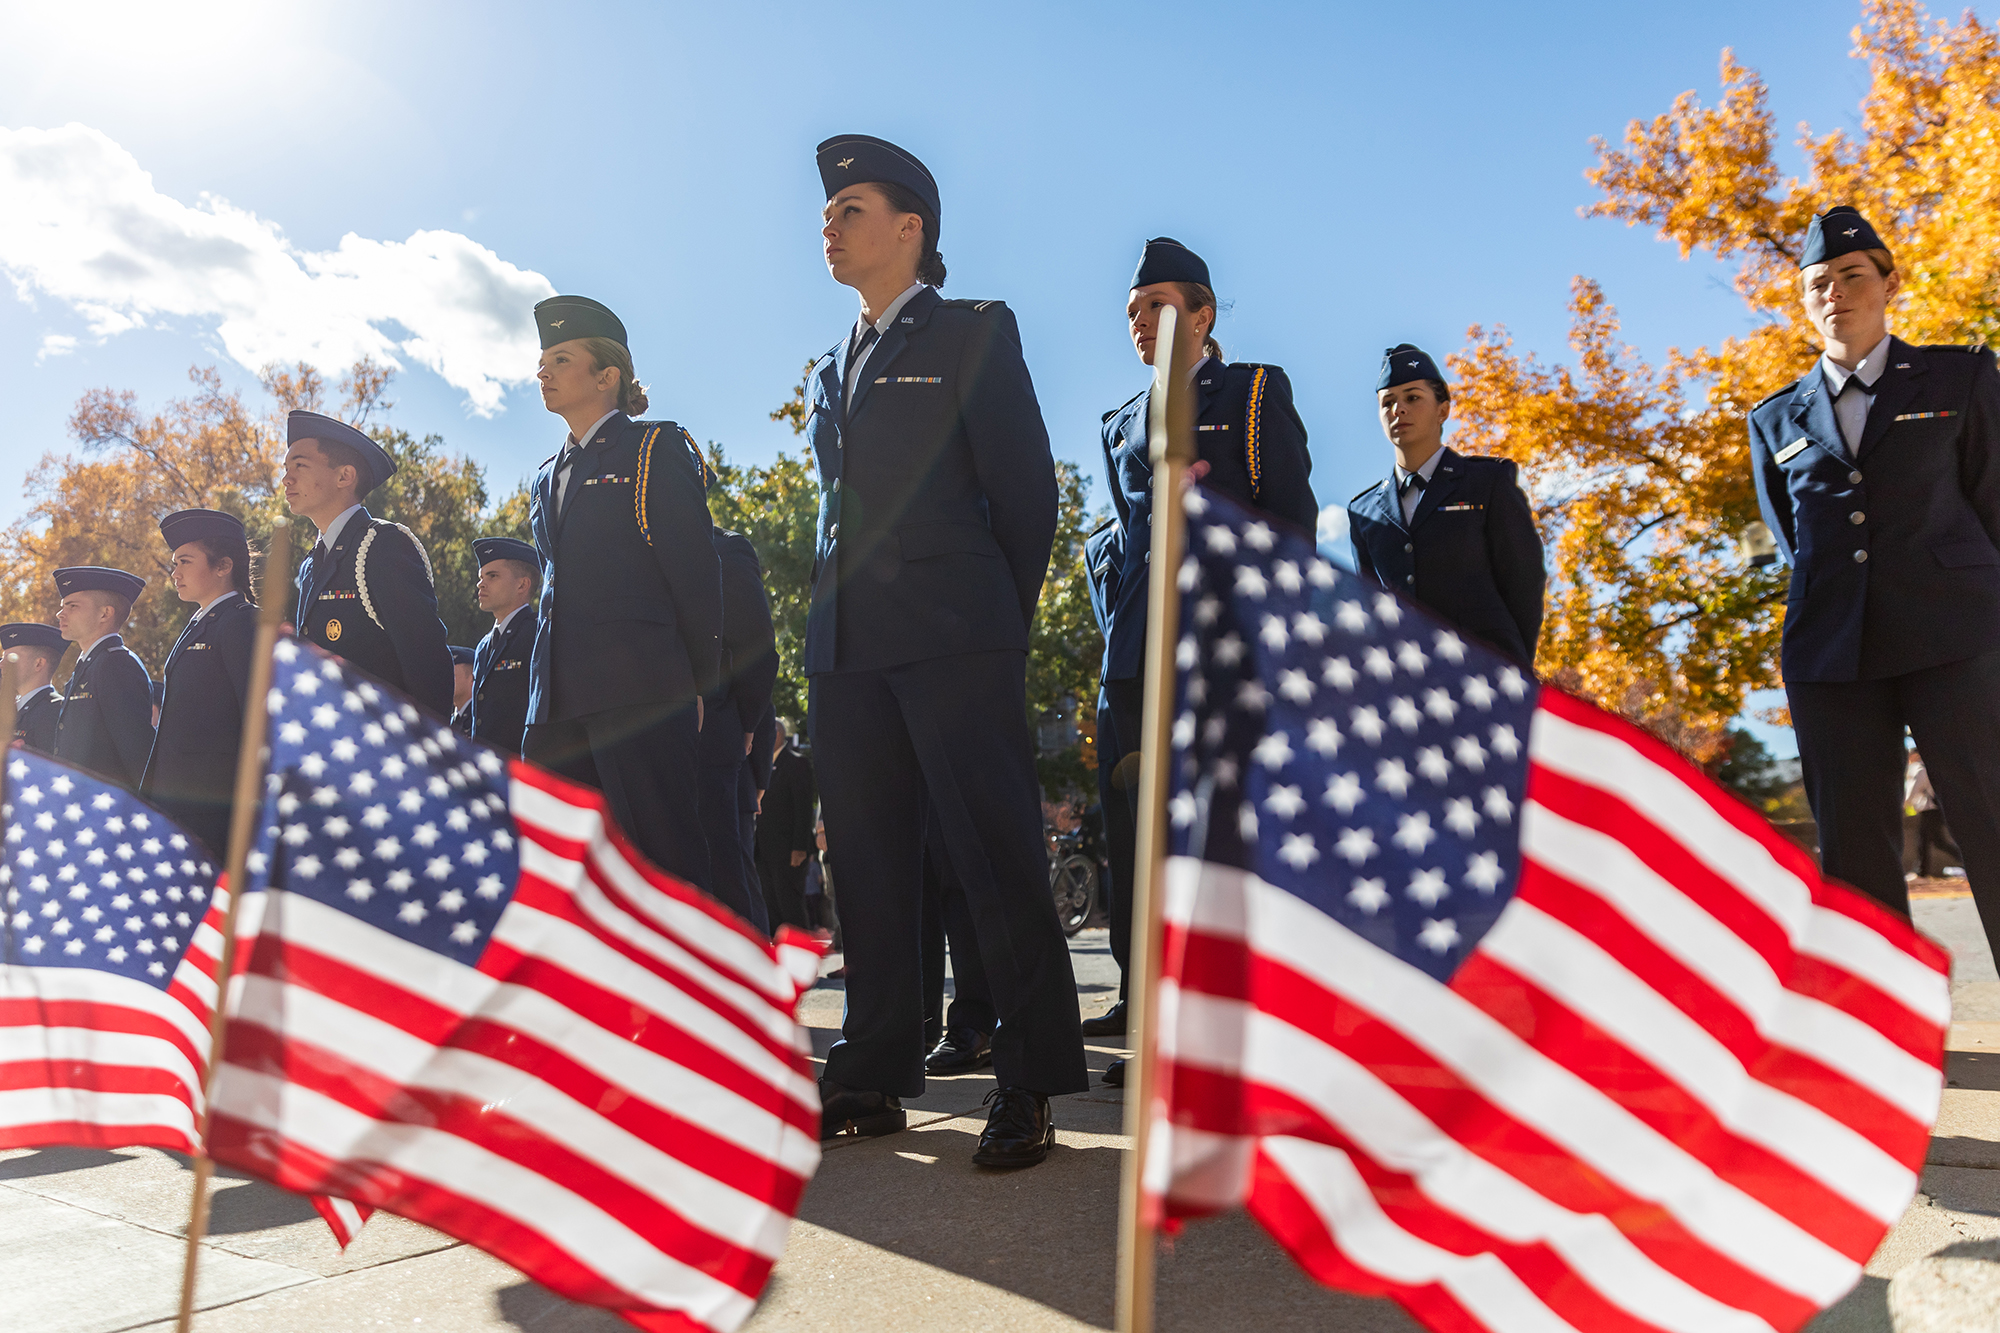 photo of rotc cadets and midshipmen with american flags in the foreground